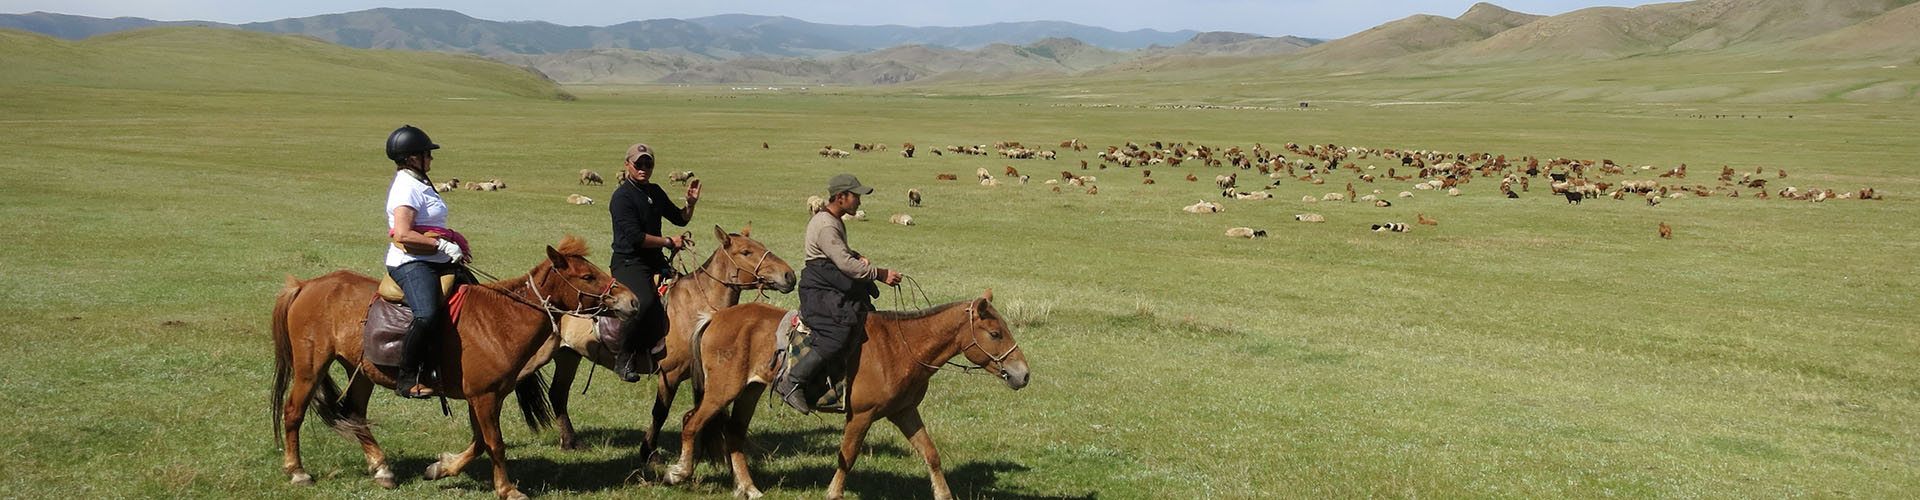 Absolu Voyages Mongolie